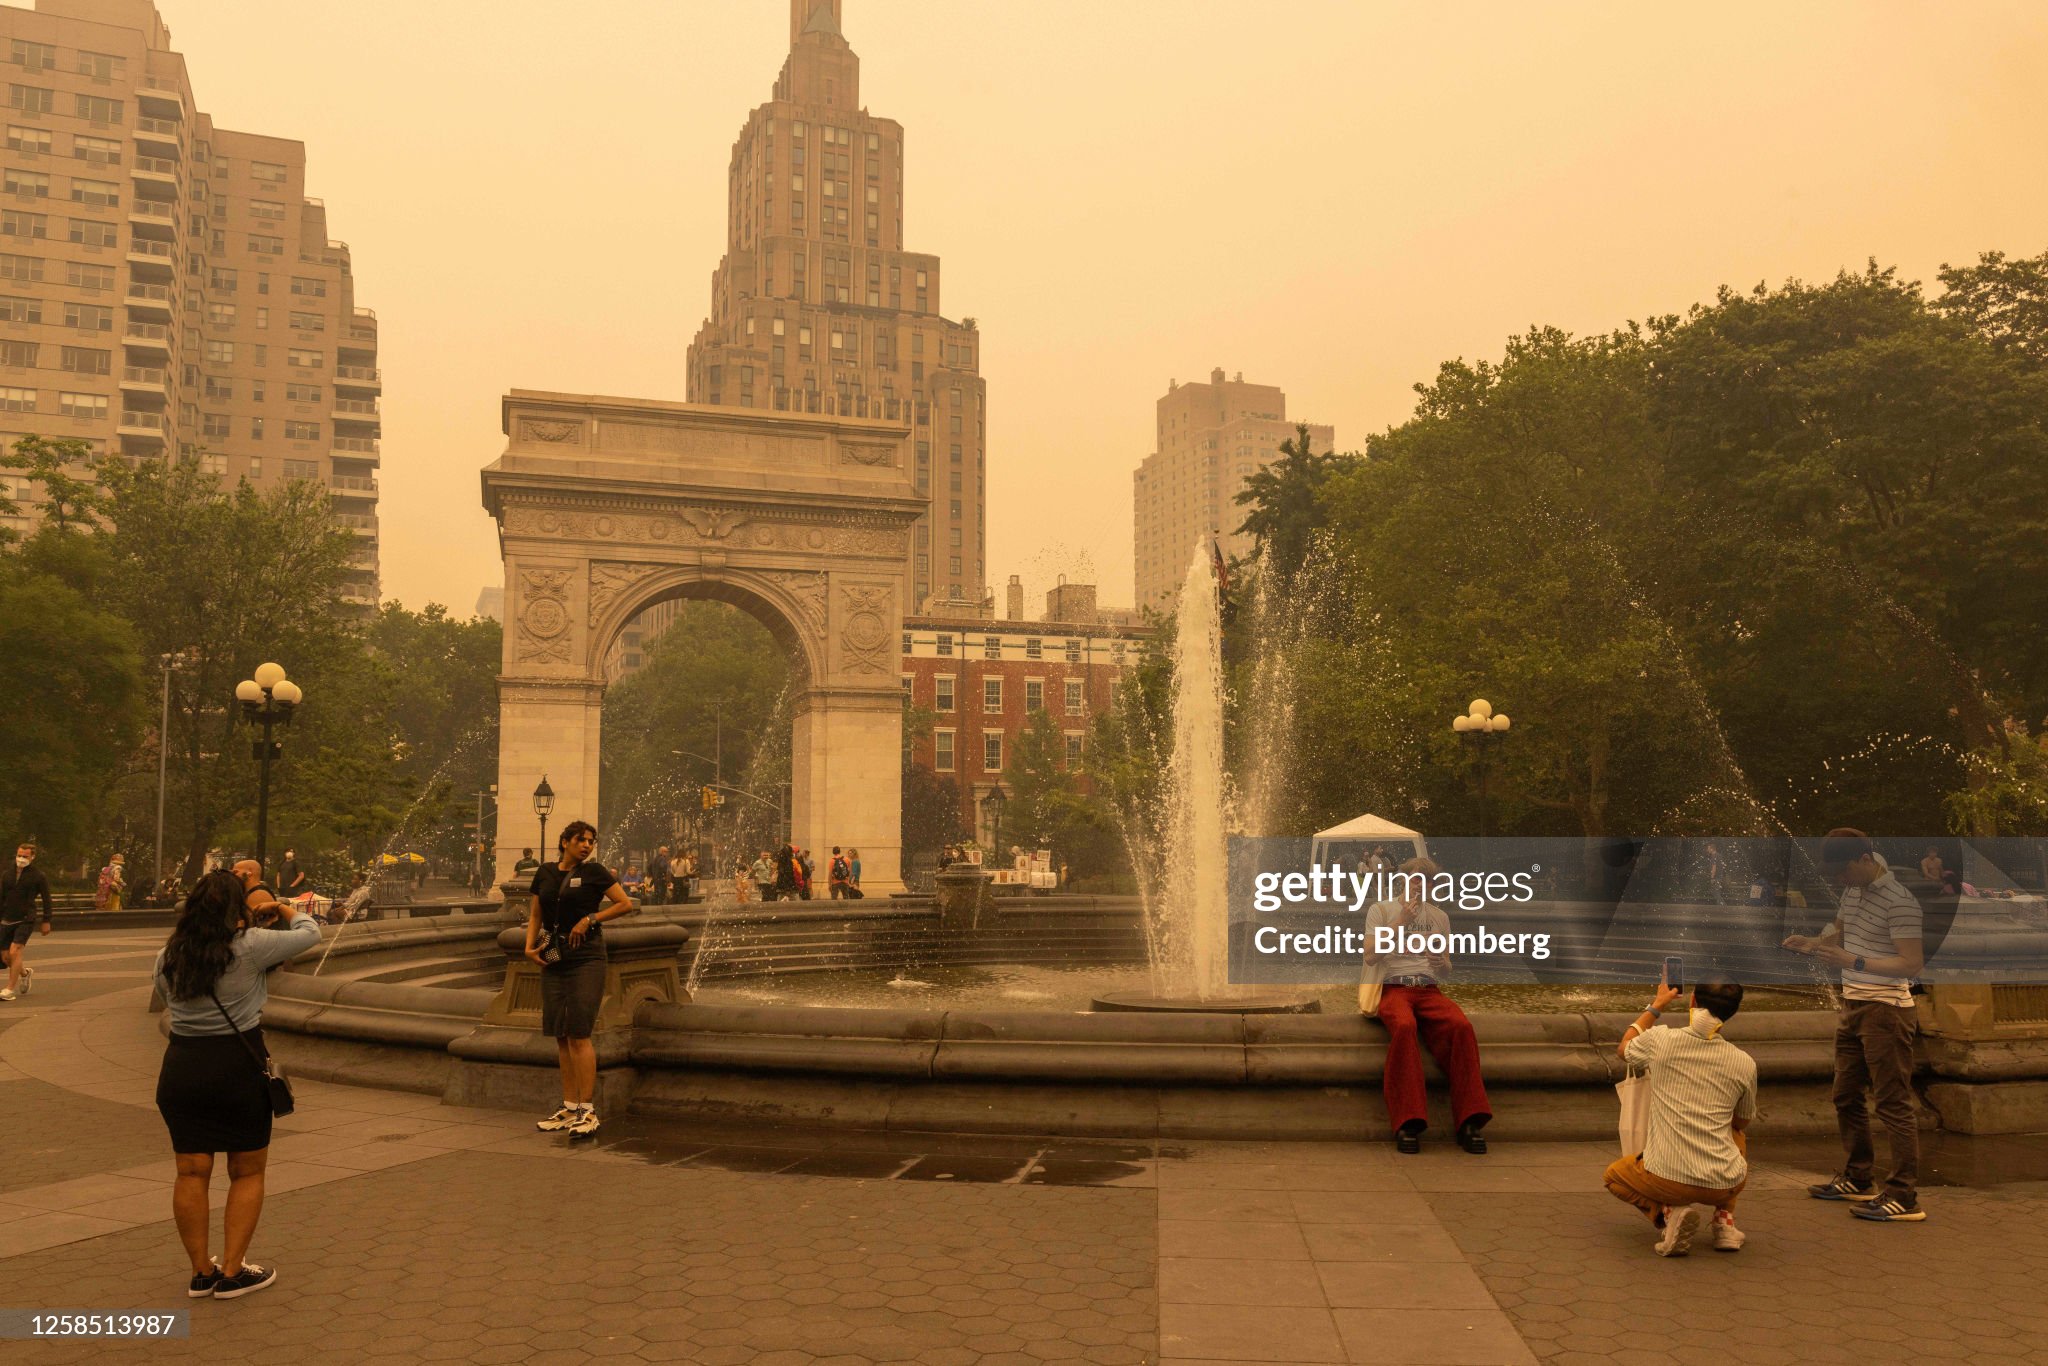 IMAGE(https://media.gettyimages.com/id/1258513987/photo/new-york-has-worlds-worst-air-pollution-as-canada-wildfires-rage.jpg?s=2048x2048&w=gi&k=20&c=8P5bgk7hHX3PuIiA7aBZ9YBPHIY8AeXS8AYgE-JwZ2g=)